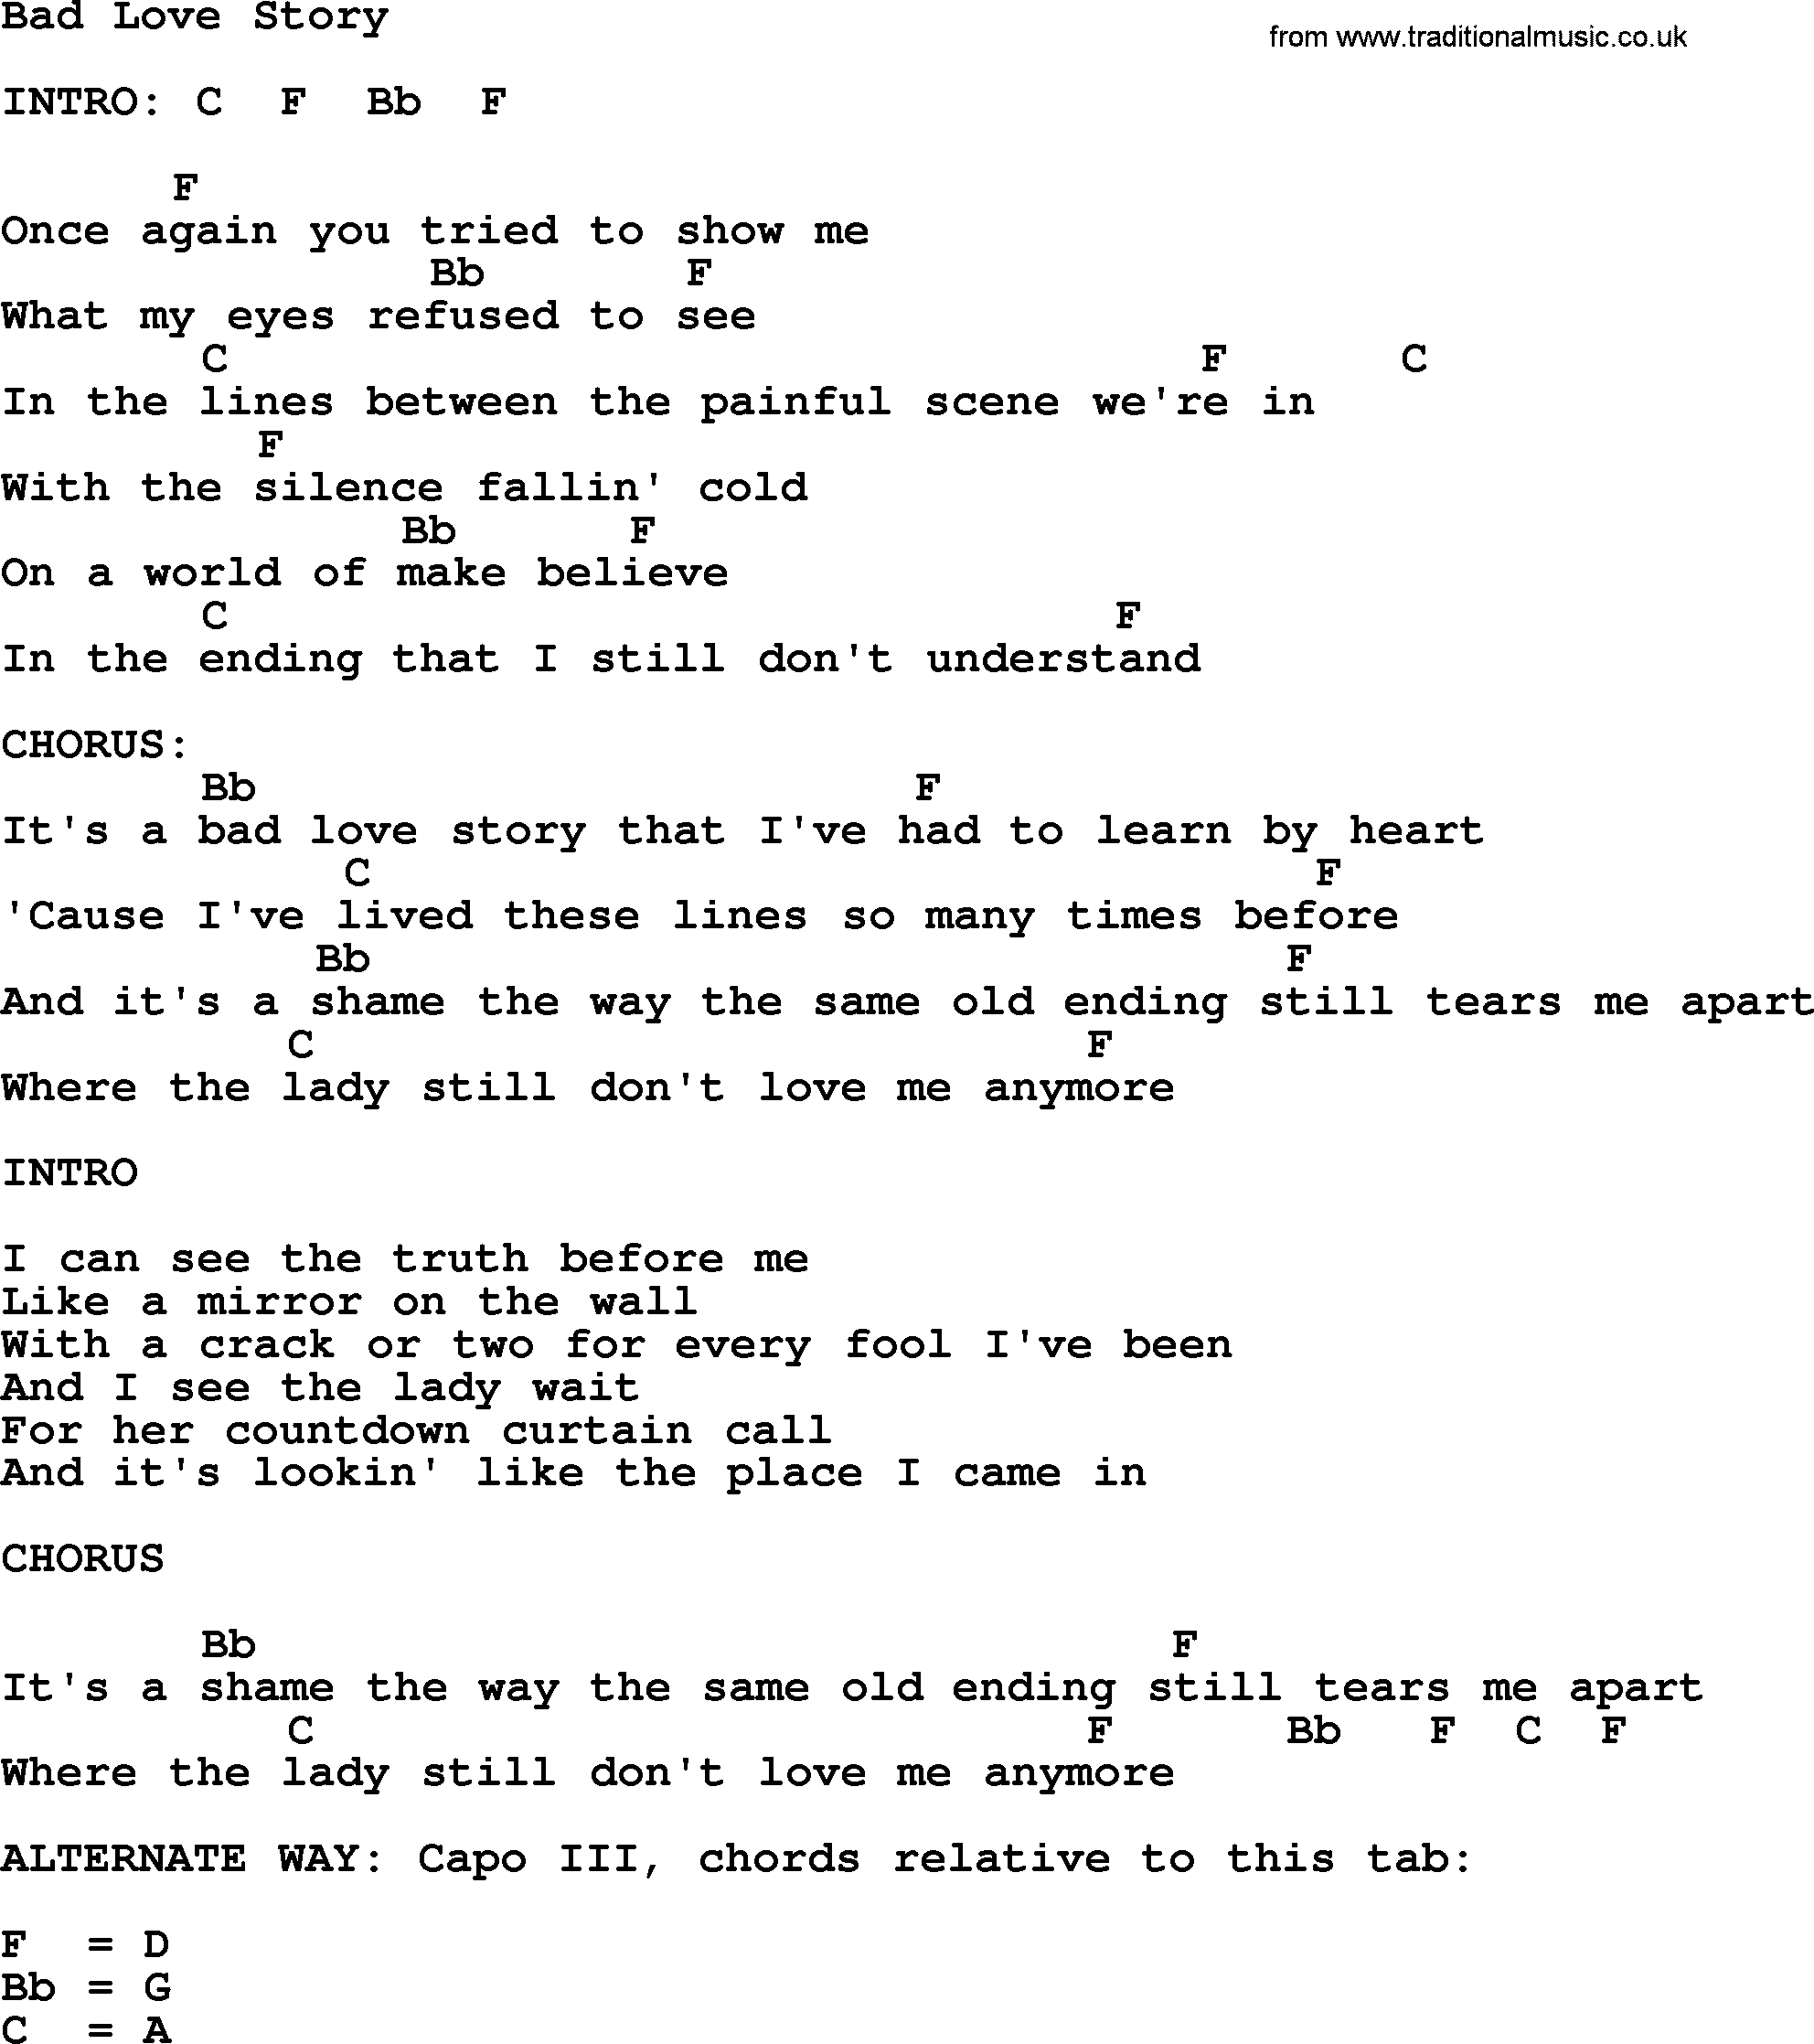 Love Story Chords Kris Kristofferson Song Bad Love Story Lyrics And Chords